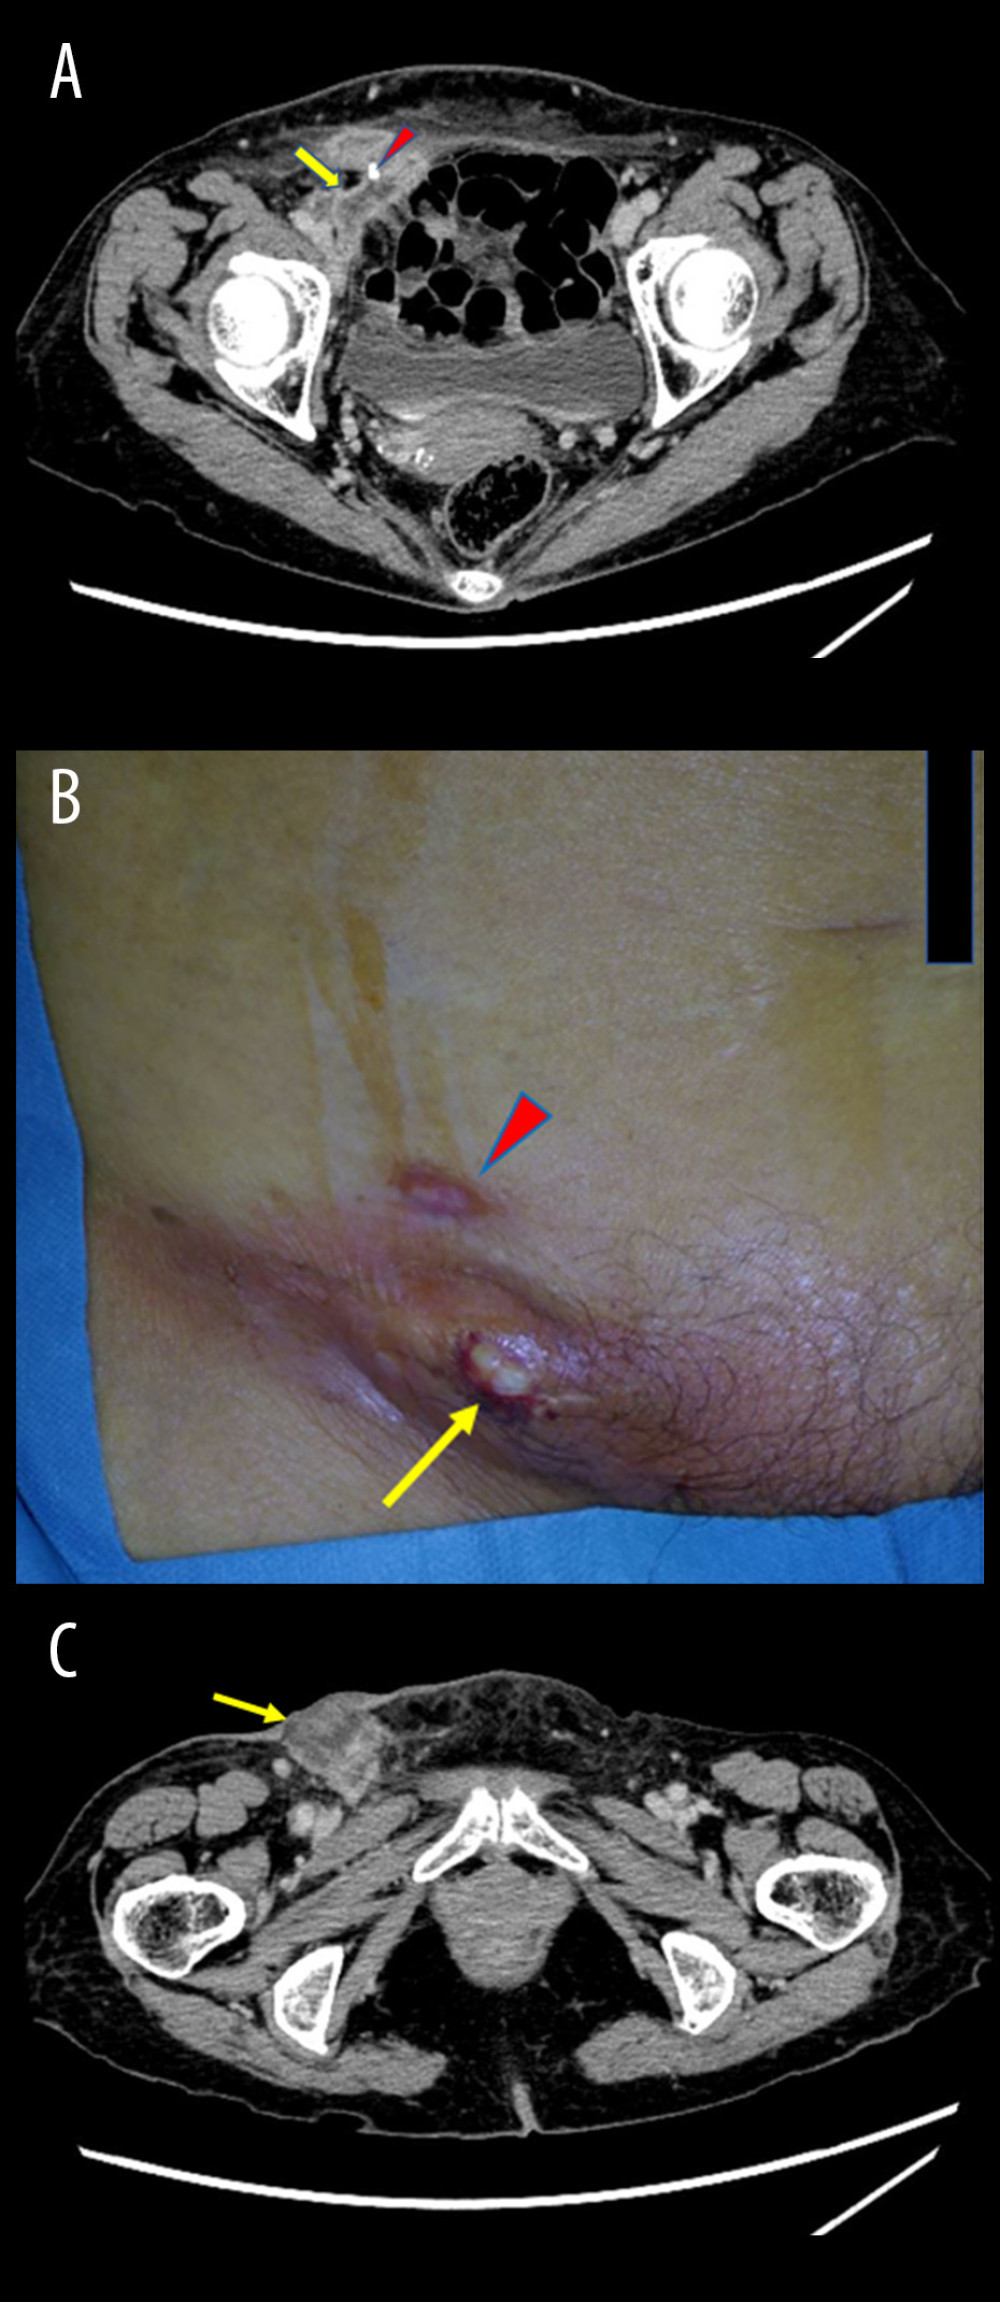 Findings on contrast-enhanced computed tomography and gross finding in the right groin. (A) Arrow: inflammation around a mesh, arrowhead: a tack. (B) Arrow: purulent discharge, arrowhead: first drainage site after conservative treatment. (C) Arrow: abscess below the right groin.